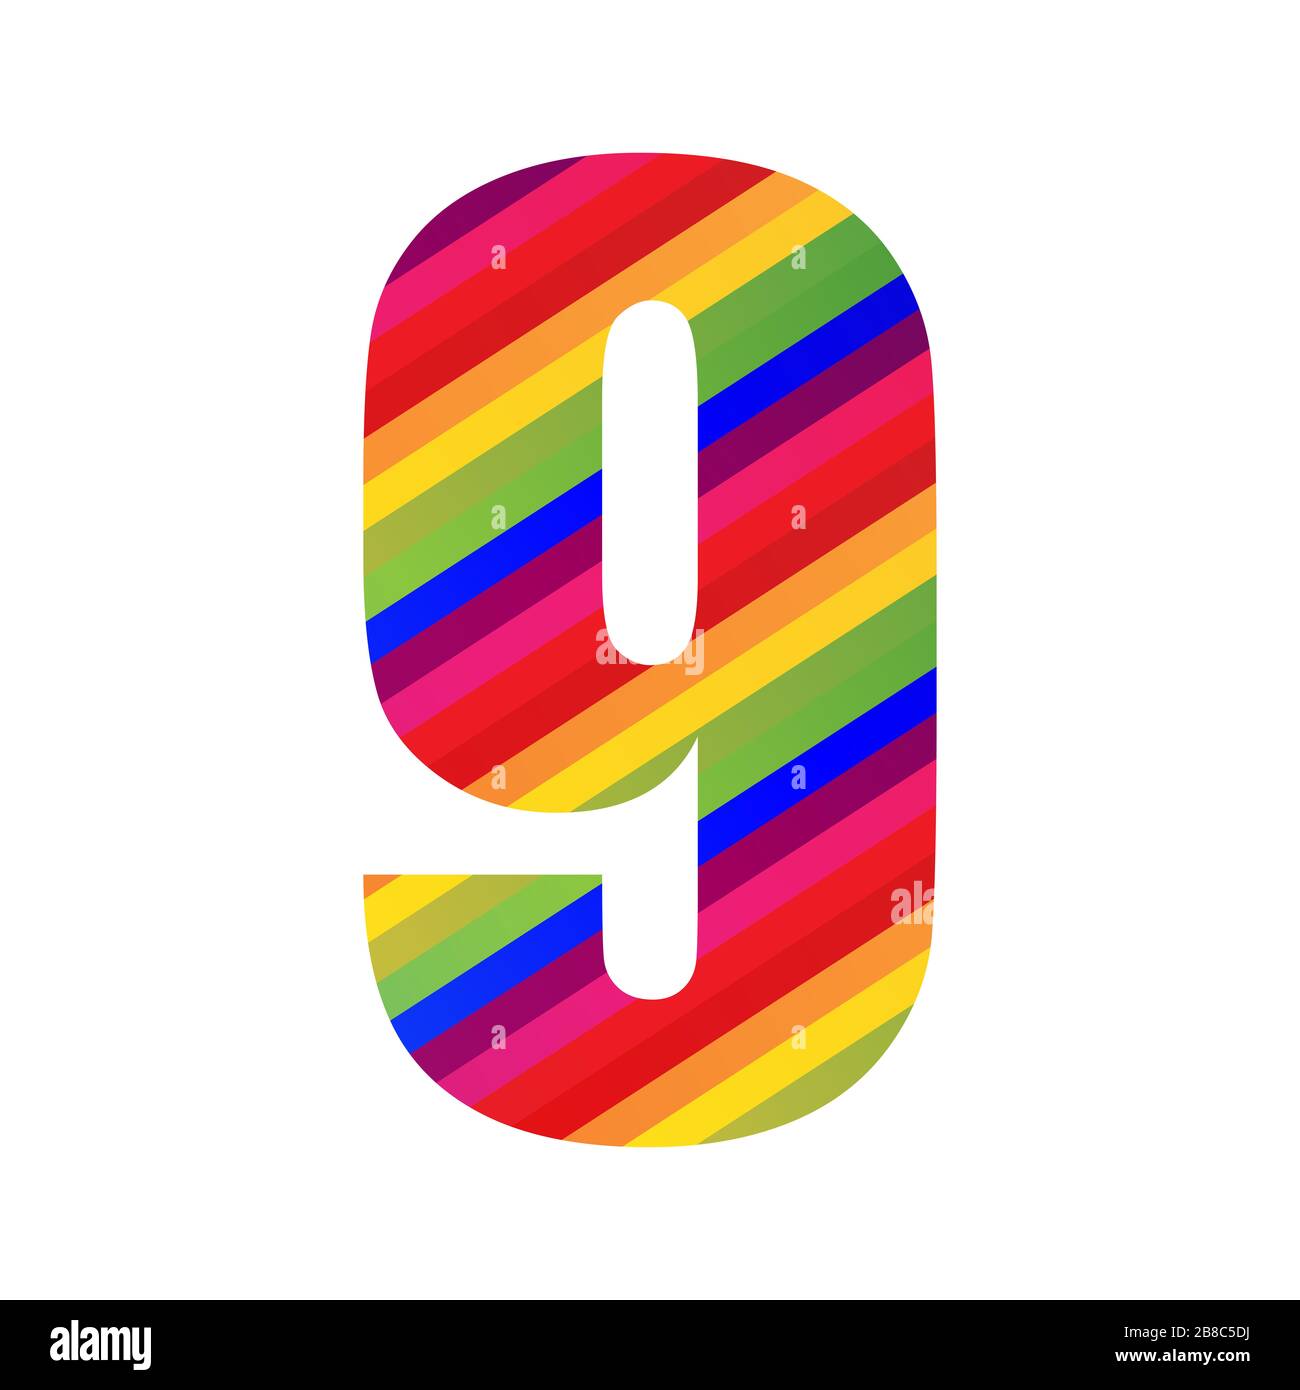 https://c8.alamy.com/comp/2B8C5DJ/9-number-rainbow-style-numeral-digit-colorful-number-vector-illustration-design-isolated-on-white-background-2B8C5DJ.jpg